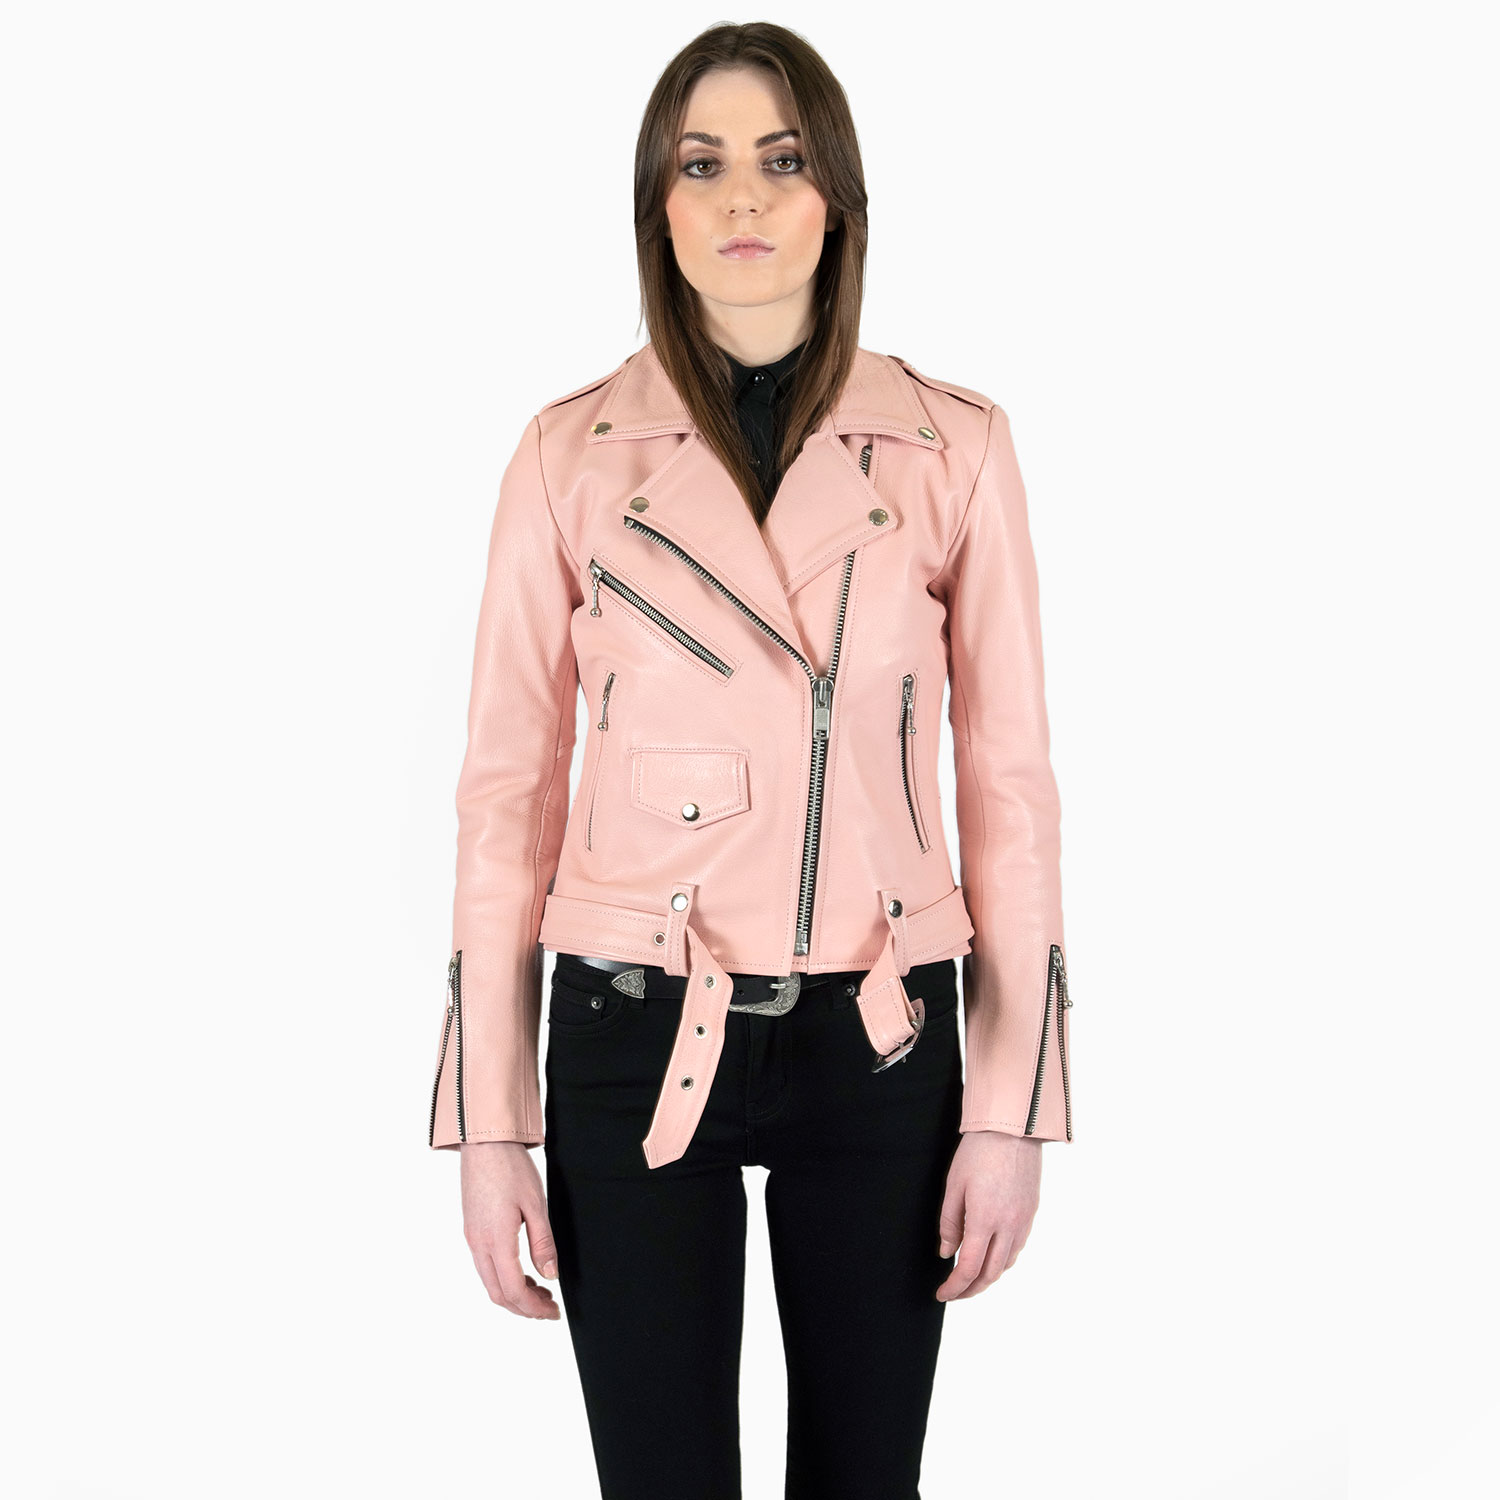 L, Hell To | 4XL) Dusty Pink 2XL, Apparel S, Jacket Commando Straight XL, (Size Leather M, - 3XL, XS,